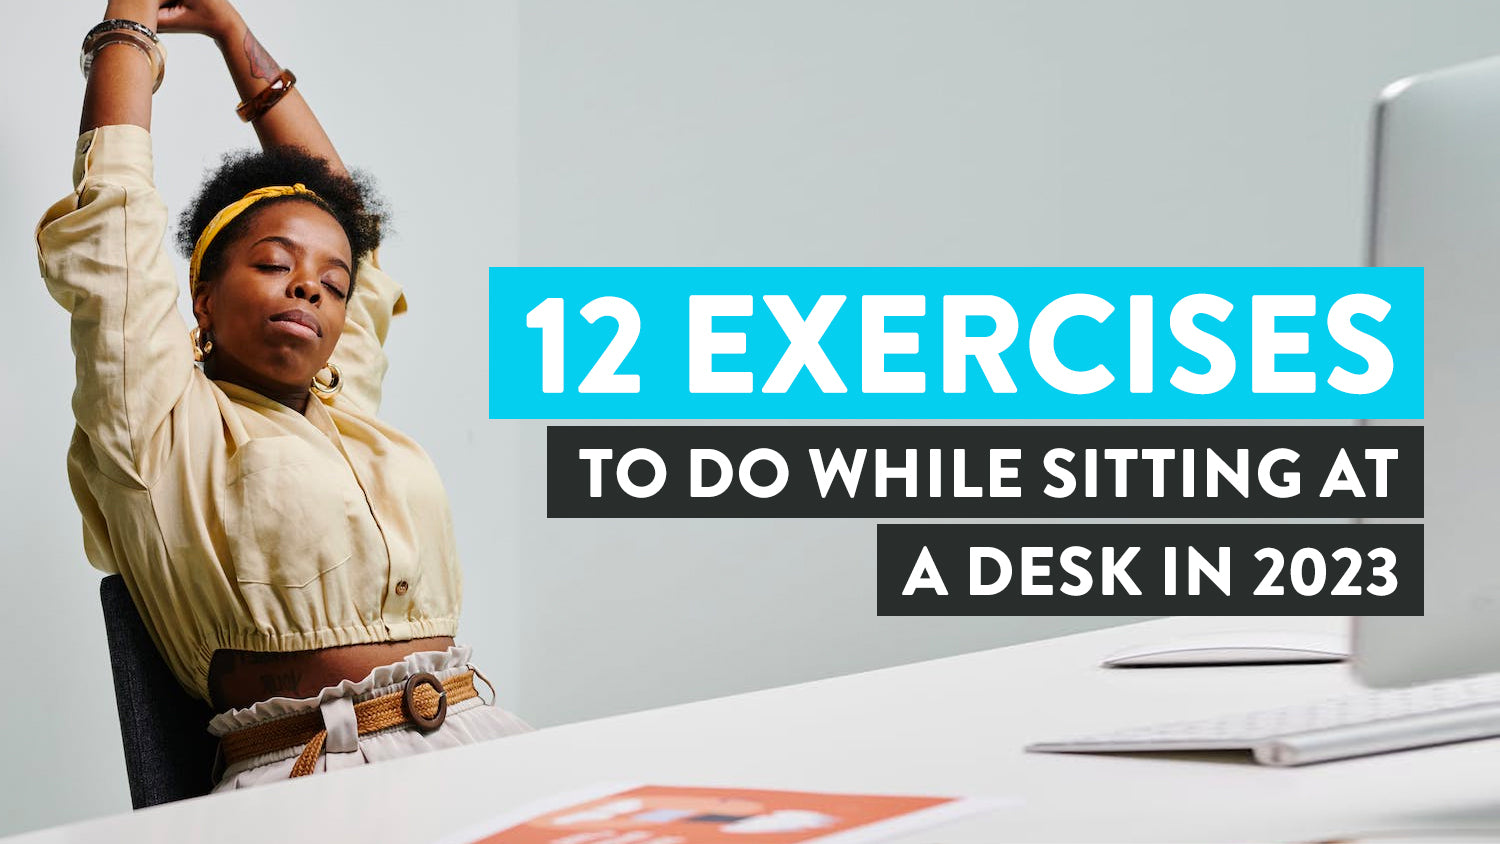 8 Exercises You Can Do Discreetly at Your Desk